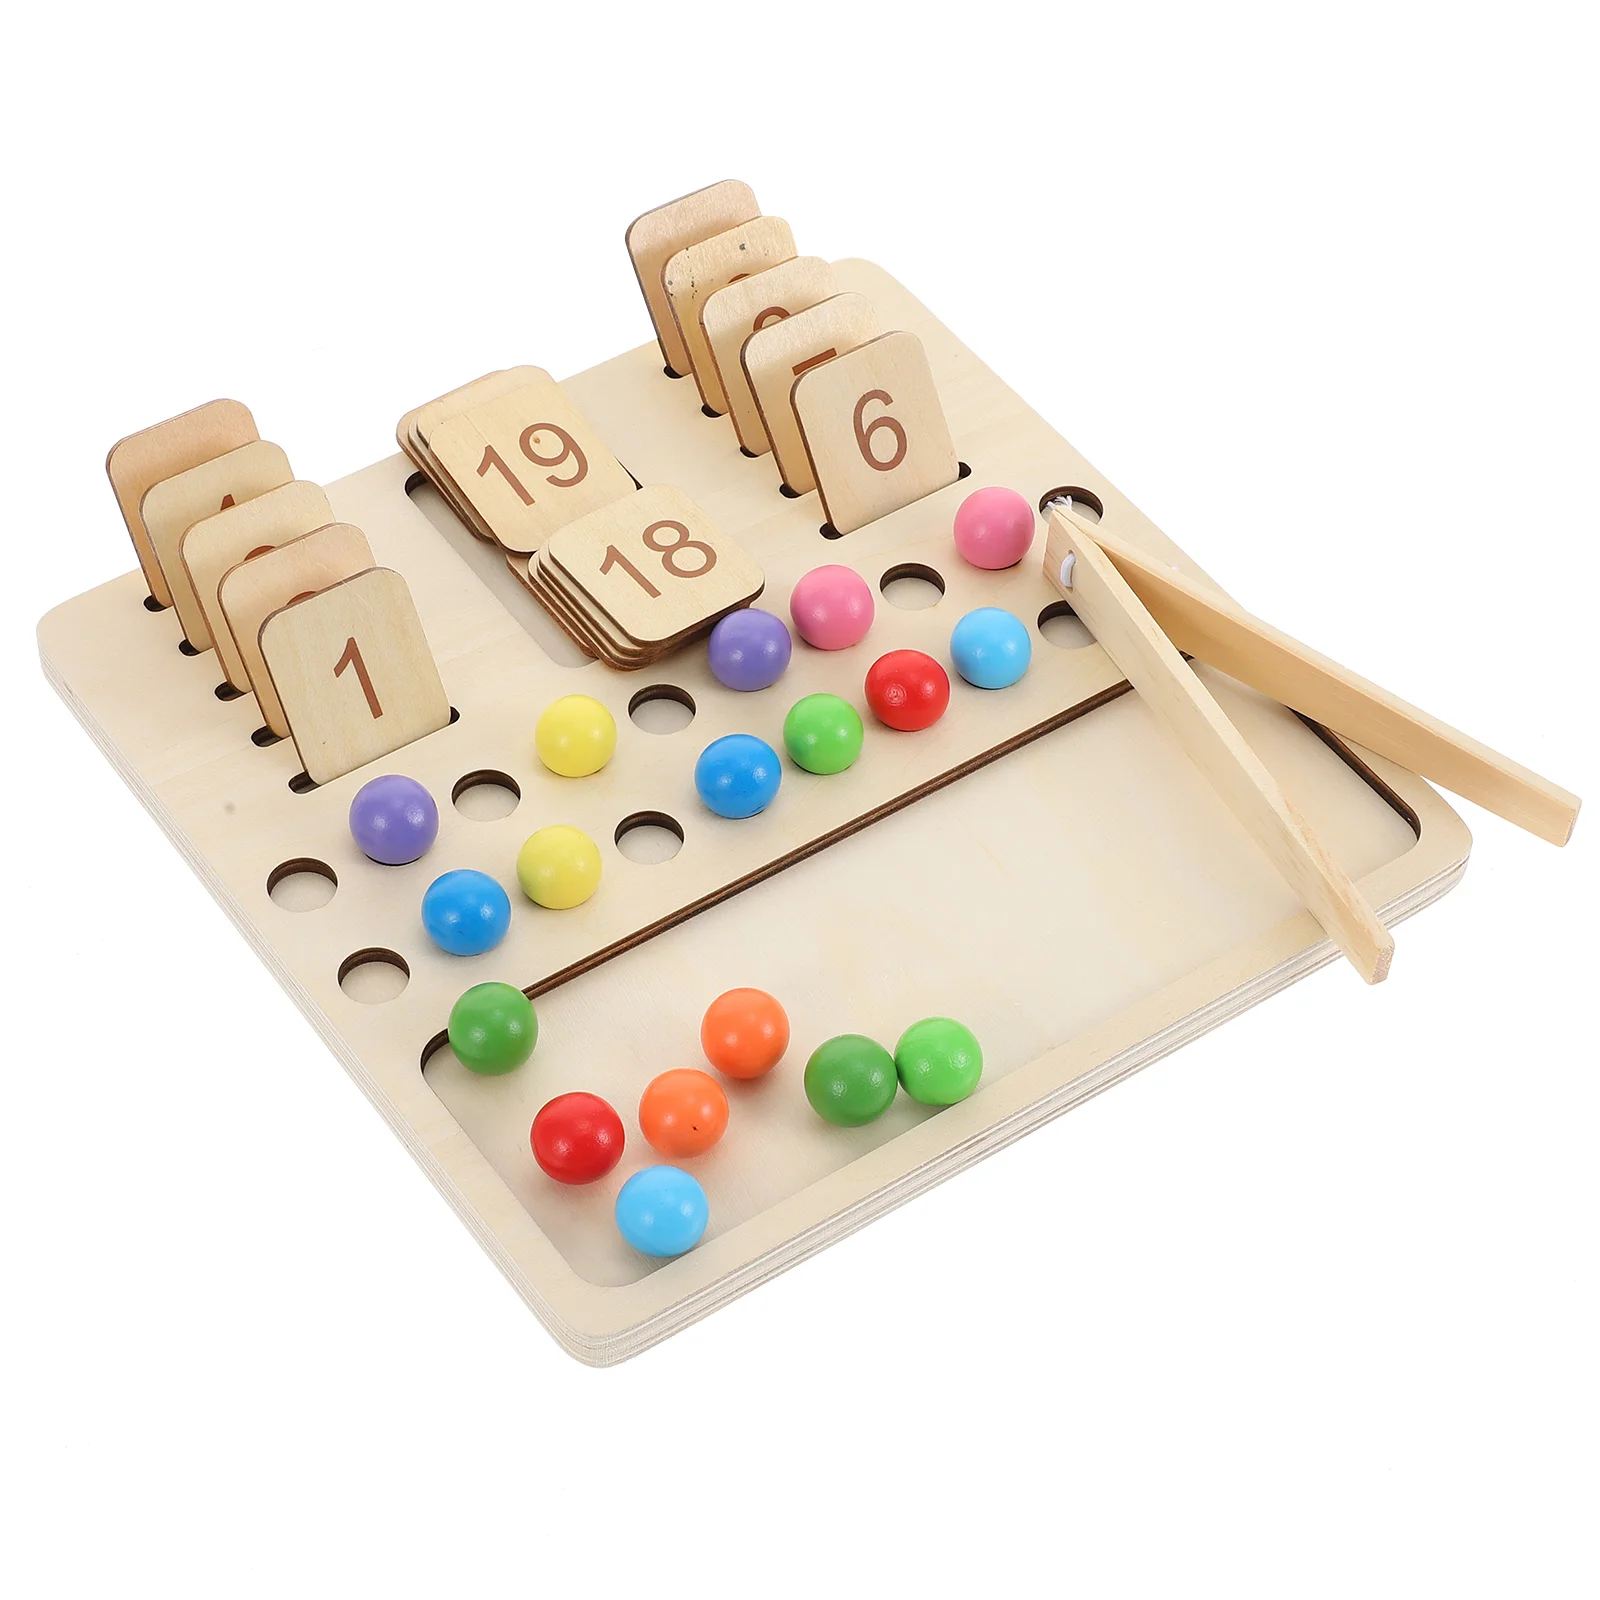 Digital Cognitive Board Toys Wooden Educational Teaching Supplies Playthings Aids Arithmetic Boards Math Learning montessori educational wooden toys for children baby toys 99 multiplication table math arithmetic teaching aids for kids